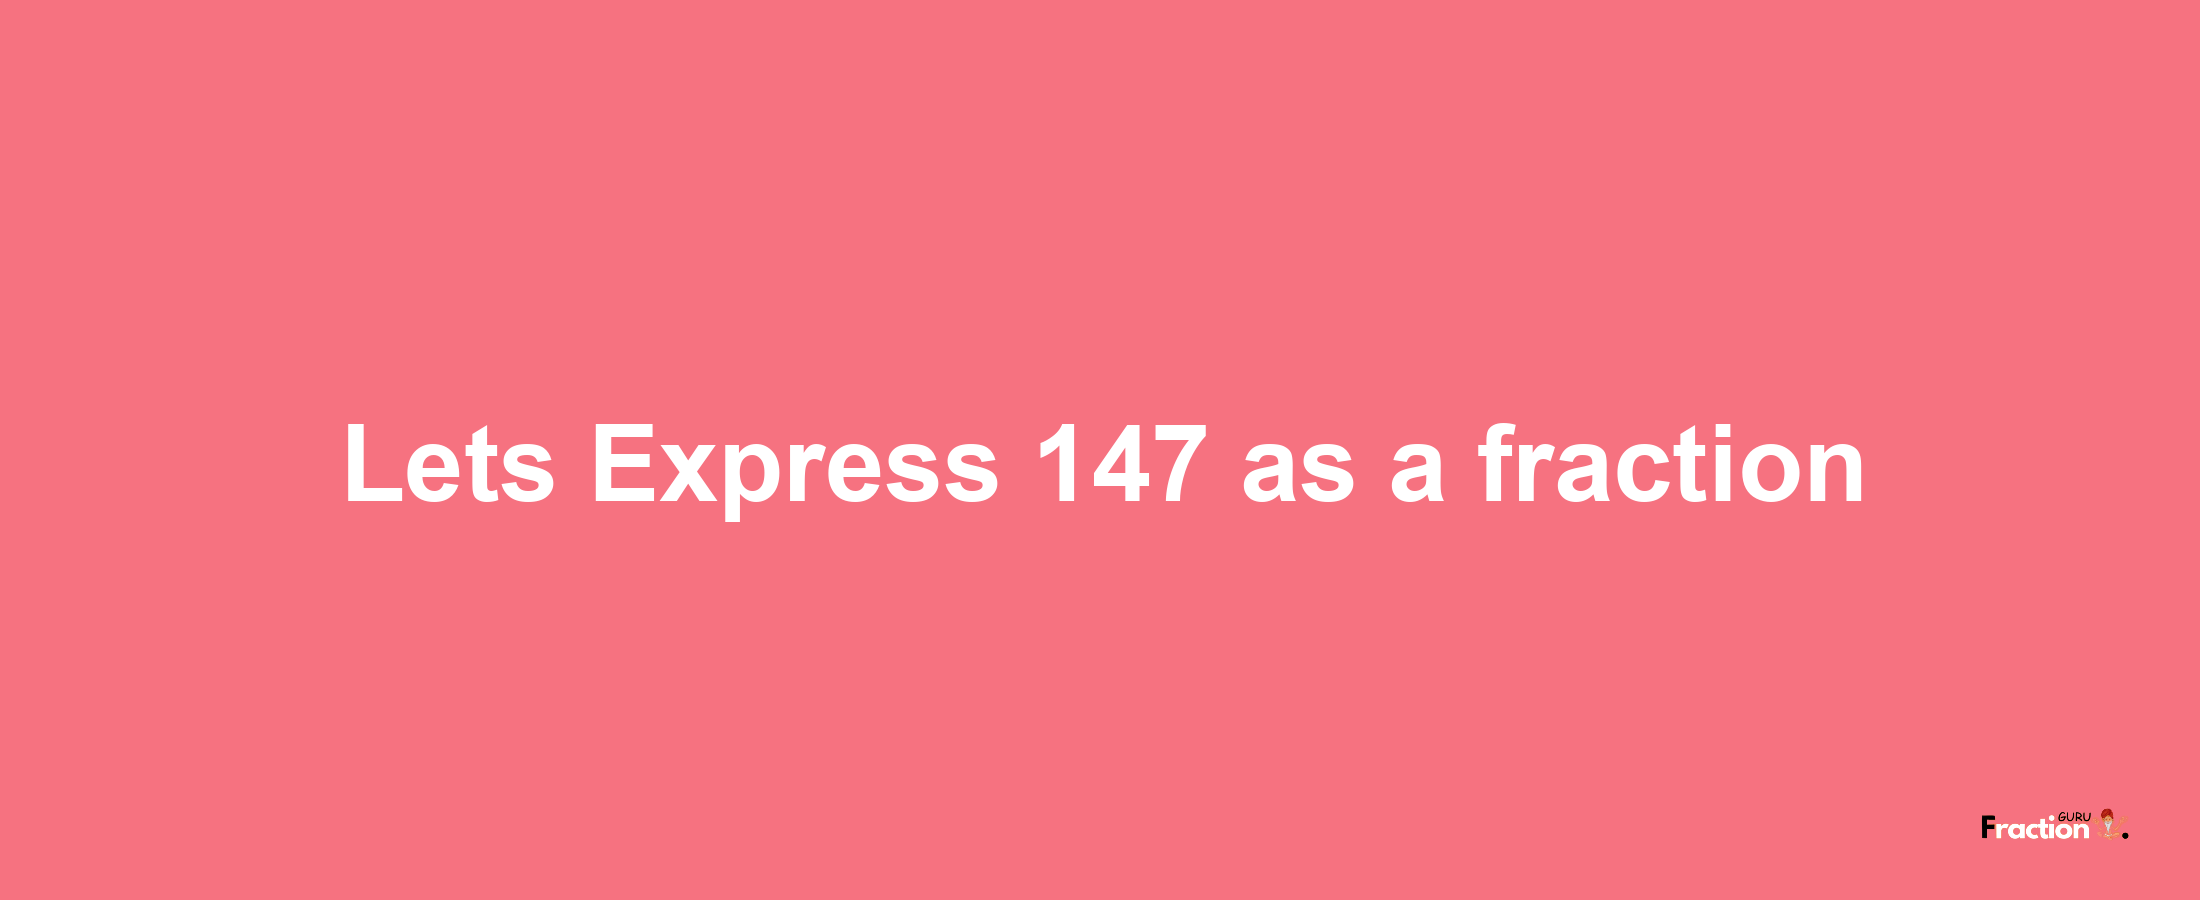 Lets Express 147 as afraction